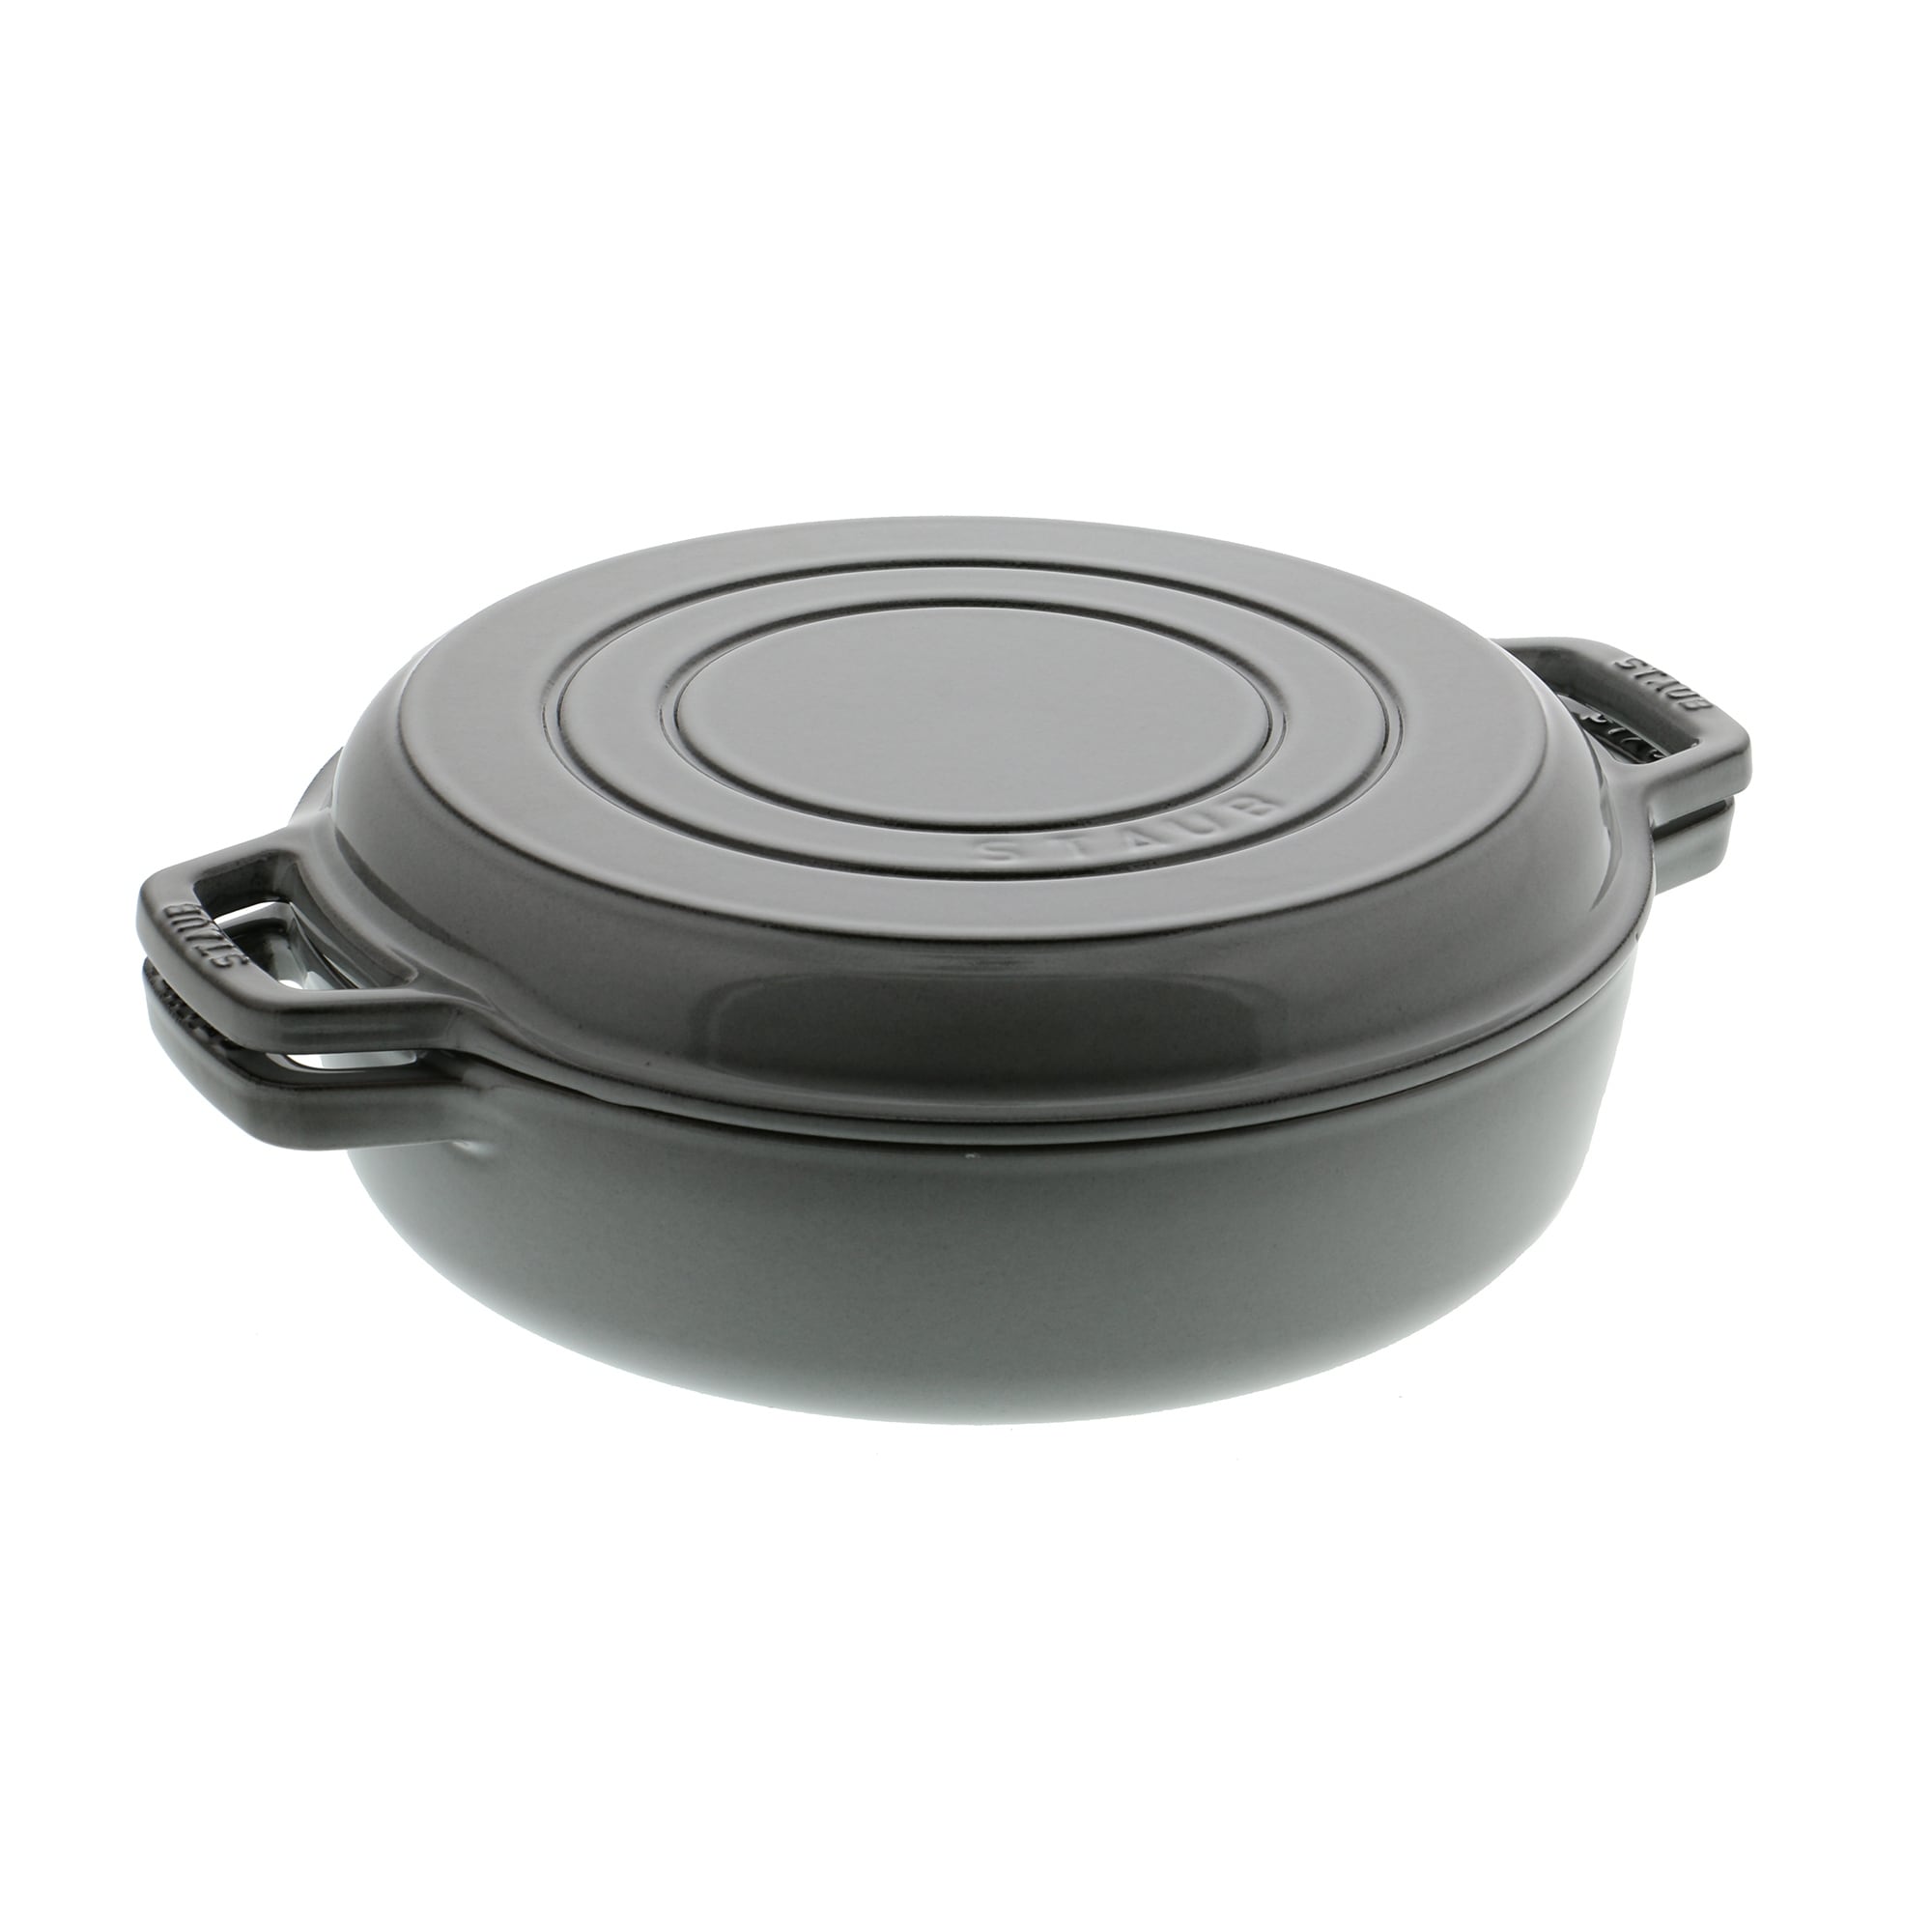 https://ak1.ostkcdn.com/images/products/is/images/direct/2a0301d0be065ae77629d05c2f37d60a6b2e6f6d/Staub-Cast-Iron-10%22-Sukiyaki-Pan---Visual-Imperfections.jpg